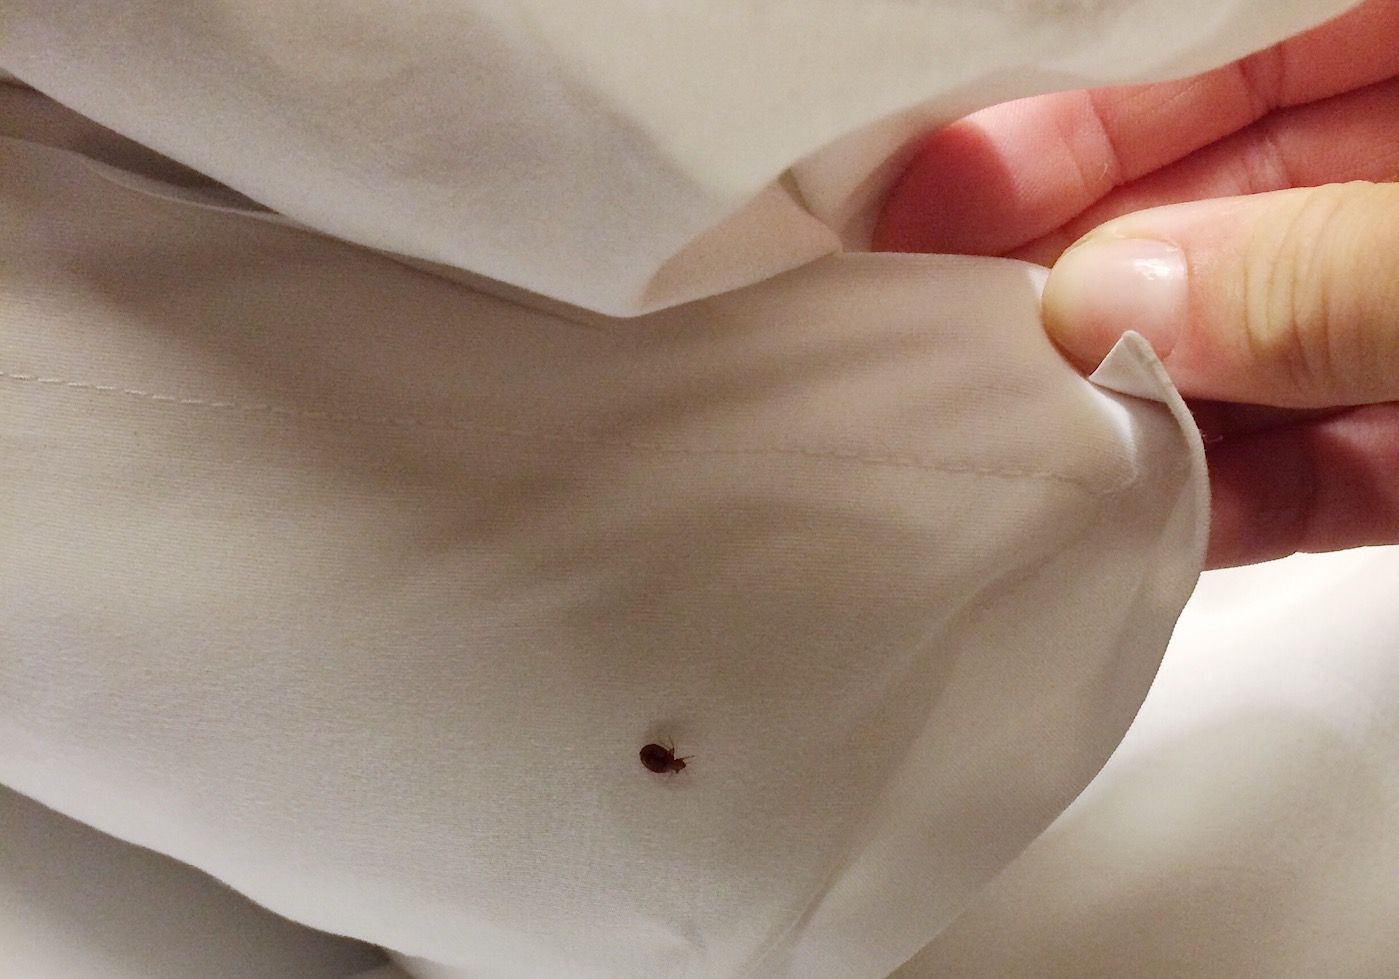 Bed Bugs Are Common in Mid-Mo. Contact BugOut Pest Control for Bed Bug Extermination Services.